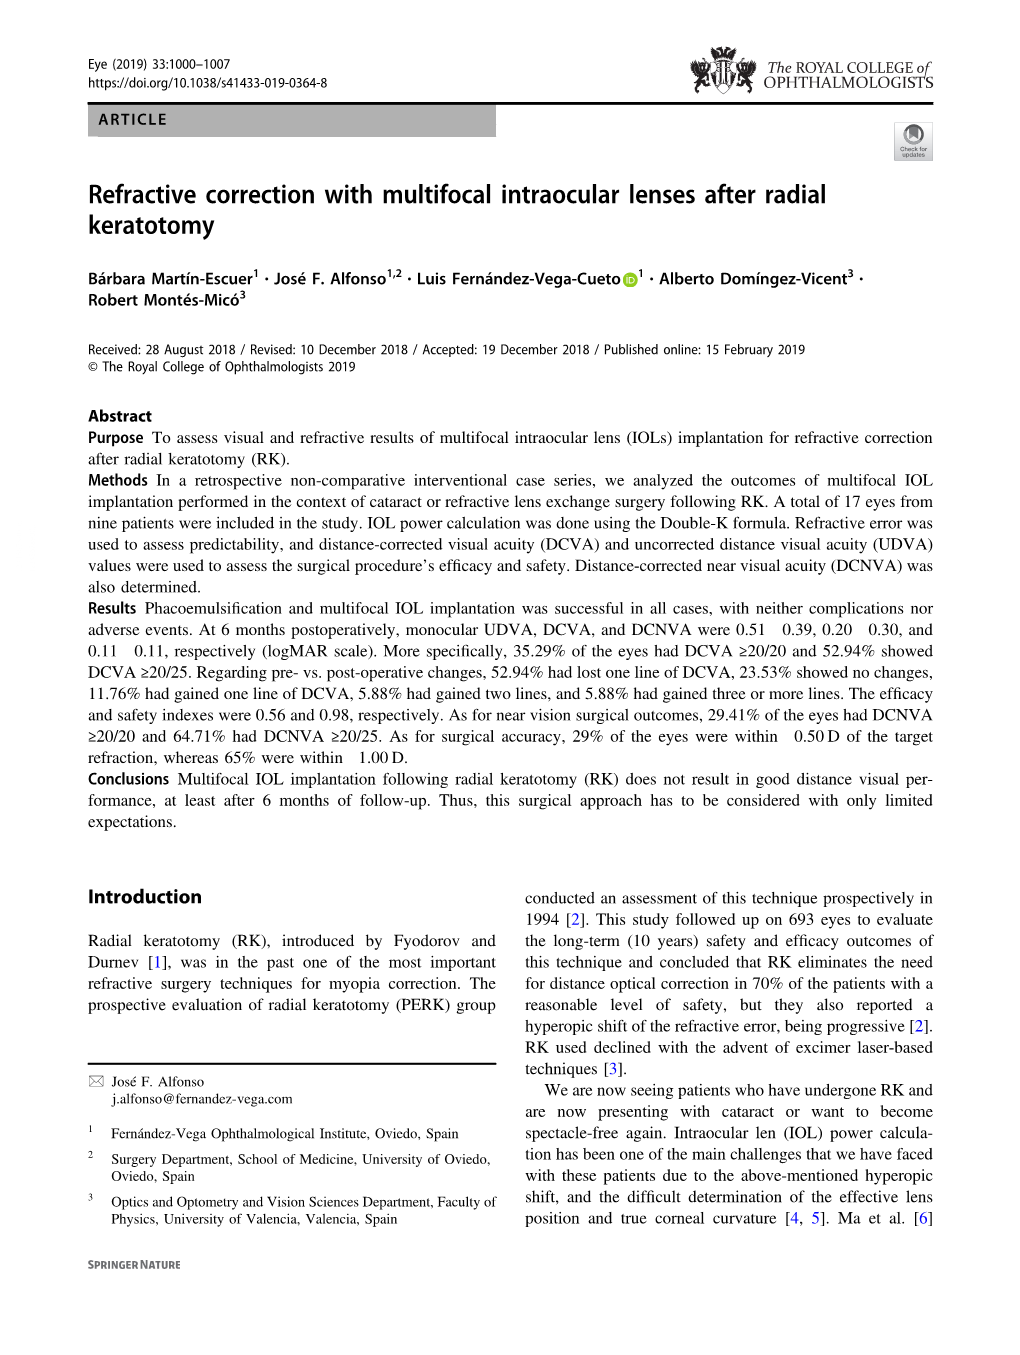 Refractive Correction with Multifocal Intraocular Lenses After Radial Keratotomy